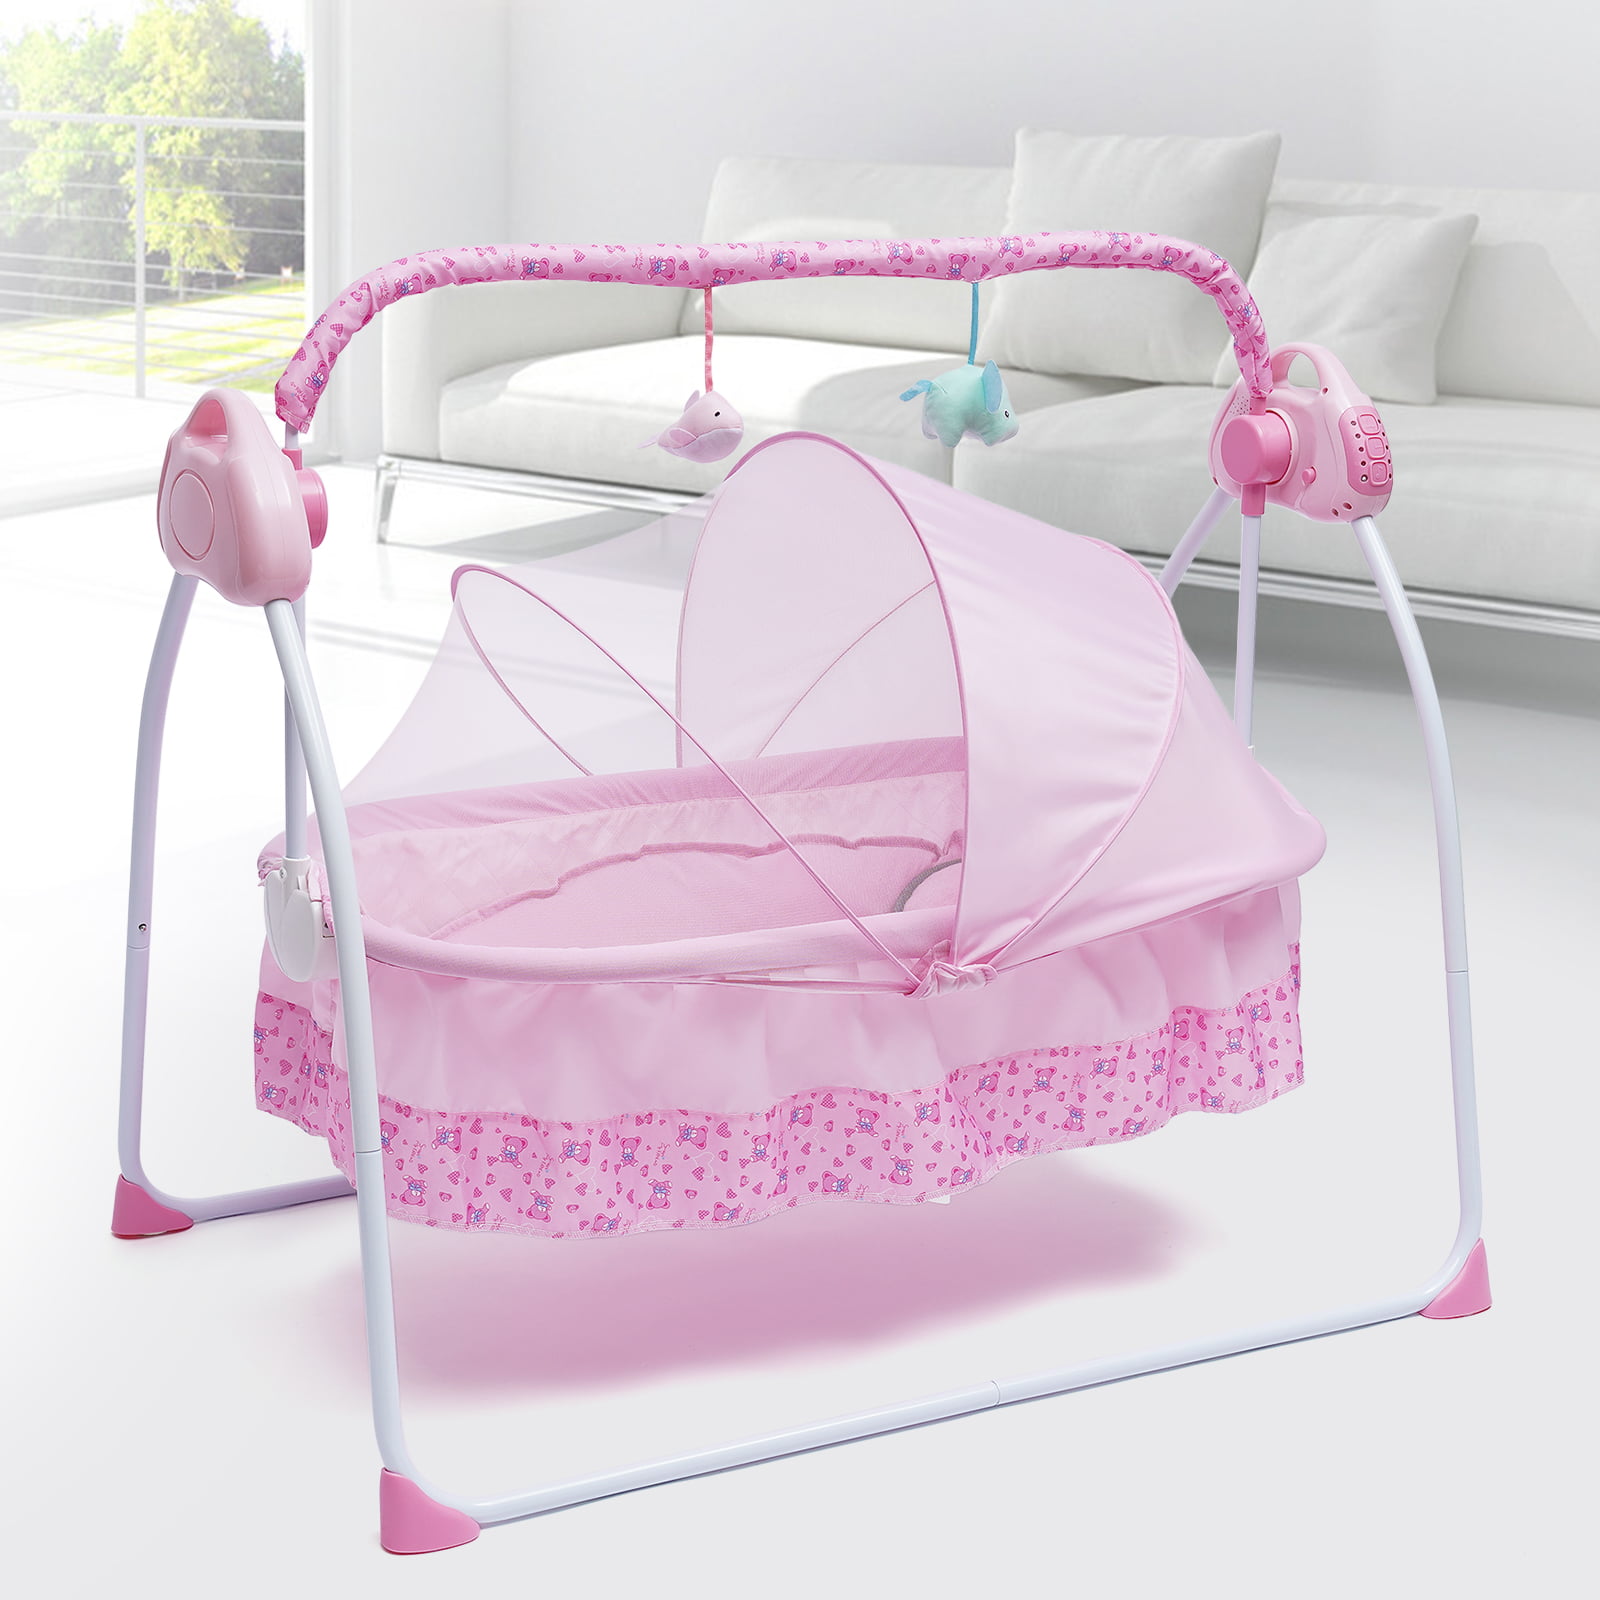 Portable Baby Bed Infant Bassinet Crib Compatible with NEST Cradle Positioned Mattress Cushion Pad Beige 